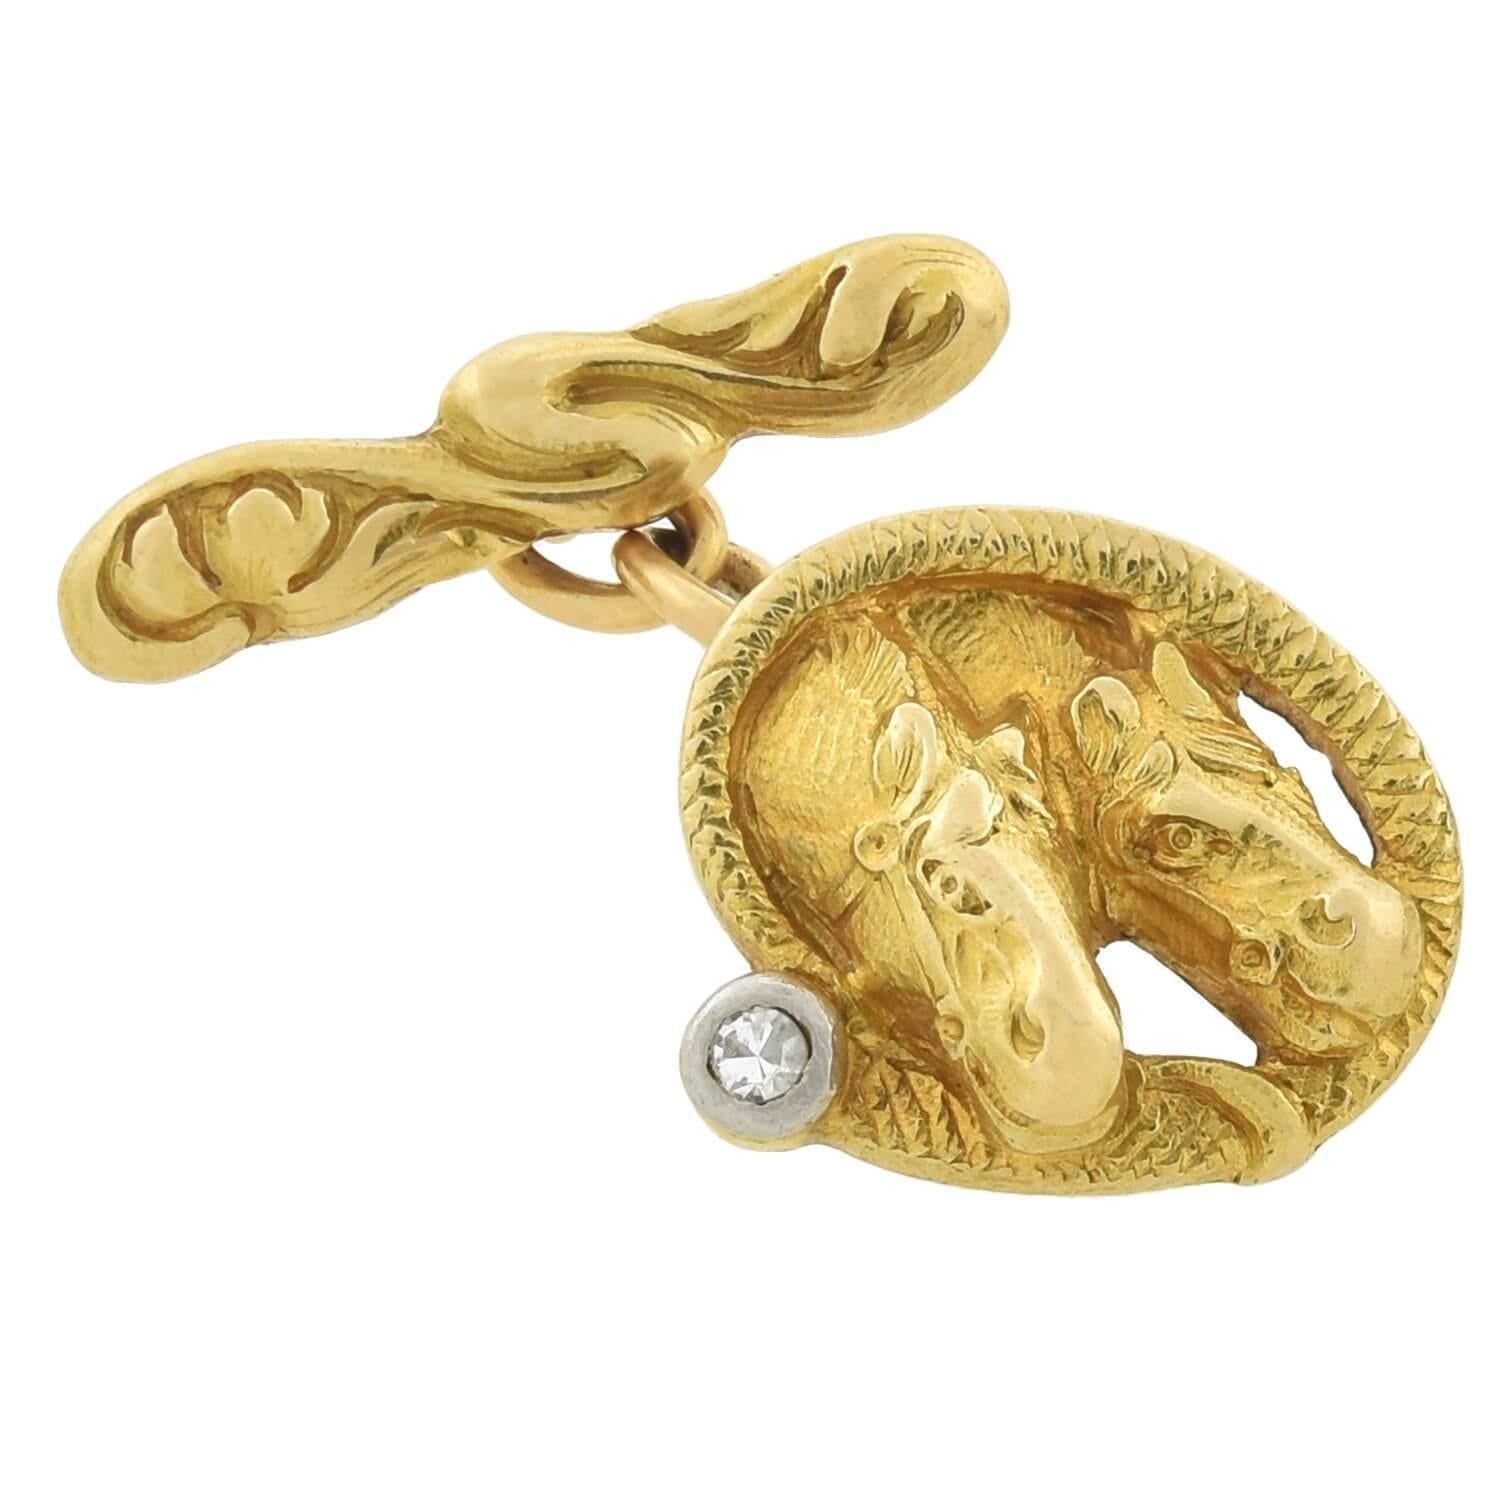 A fantastic and unique pair of equestrian-inspired cufflinks from the Edwardian (ca1910) era! Crafted in vibrant 18kt yellow gold with platinum accents, each cufflink displays a raised repousse design depicting two animated racing horses. The front